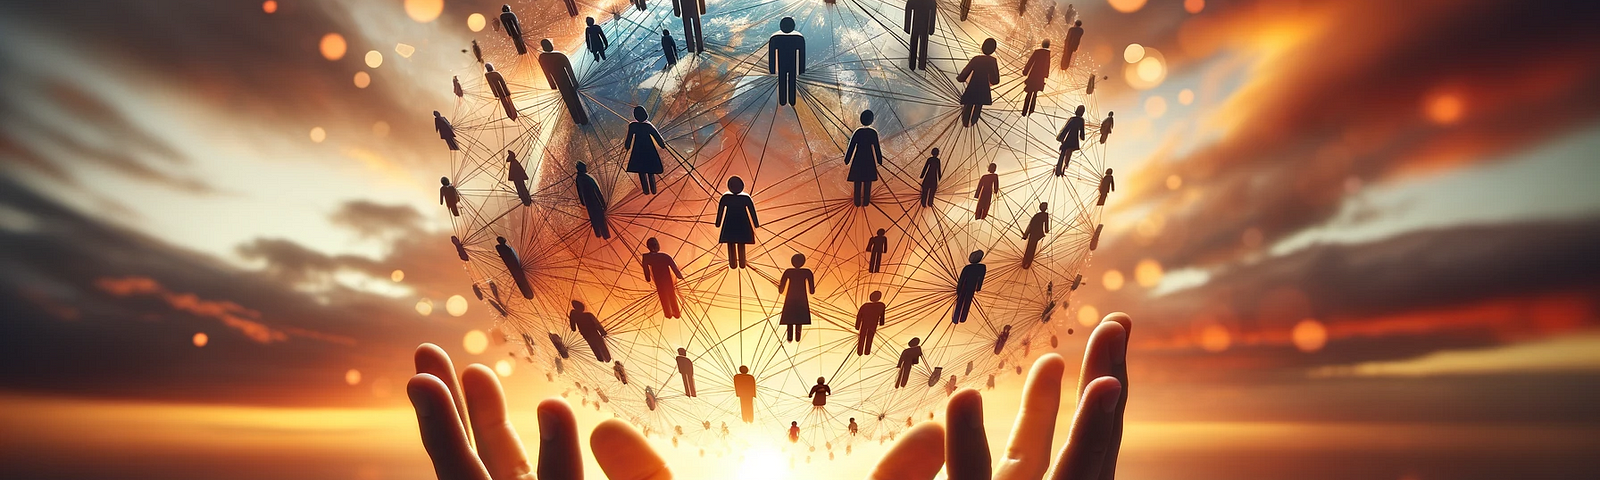 interconnected hands of diverse people, forming a network against a background of a warm sunrise.